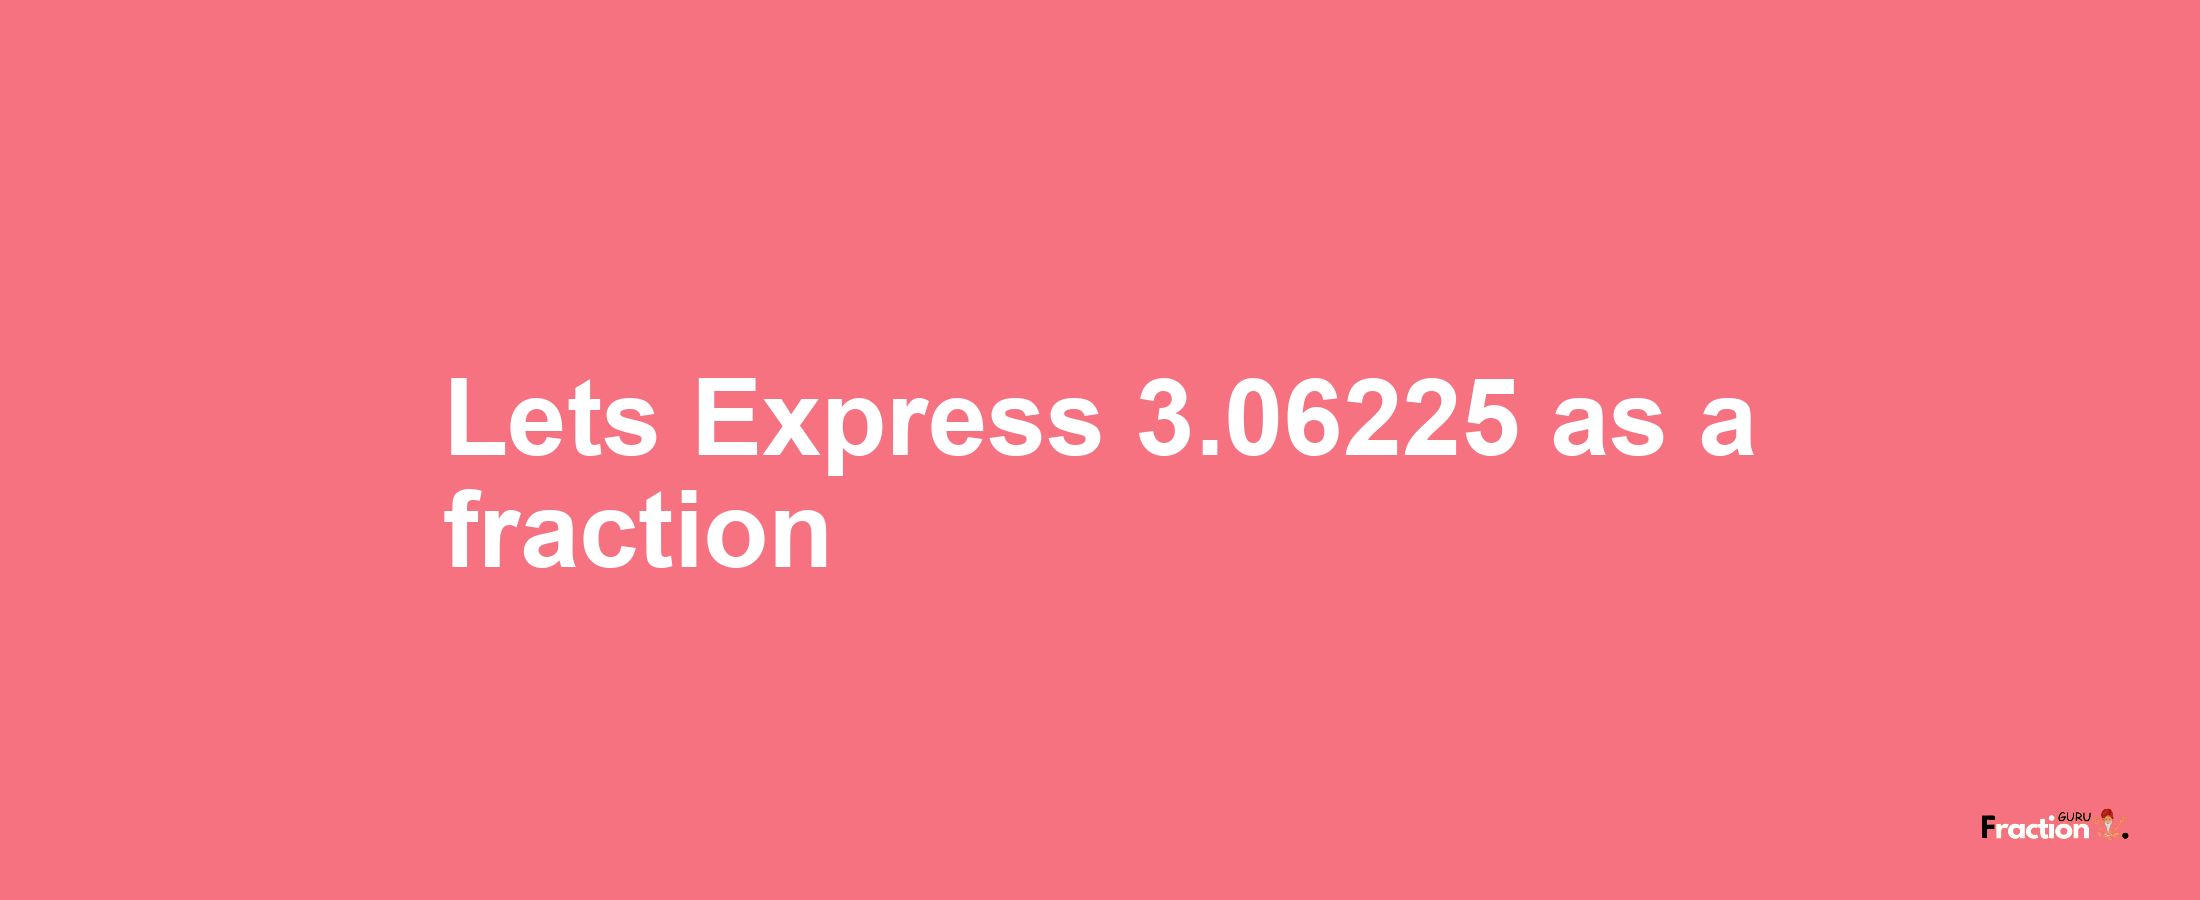 Lets Express 3.06225 as afraction